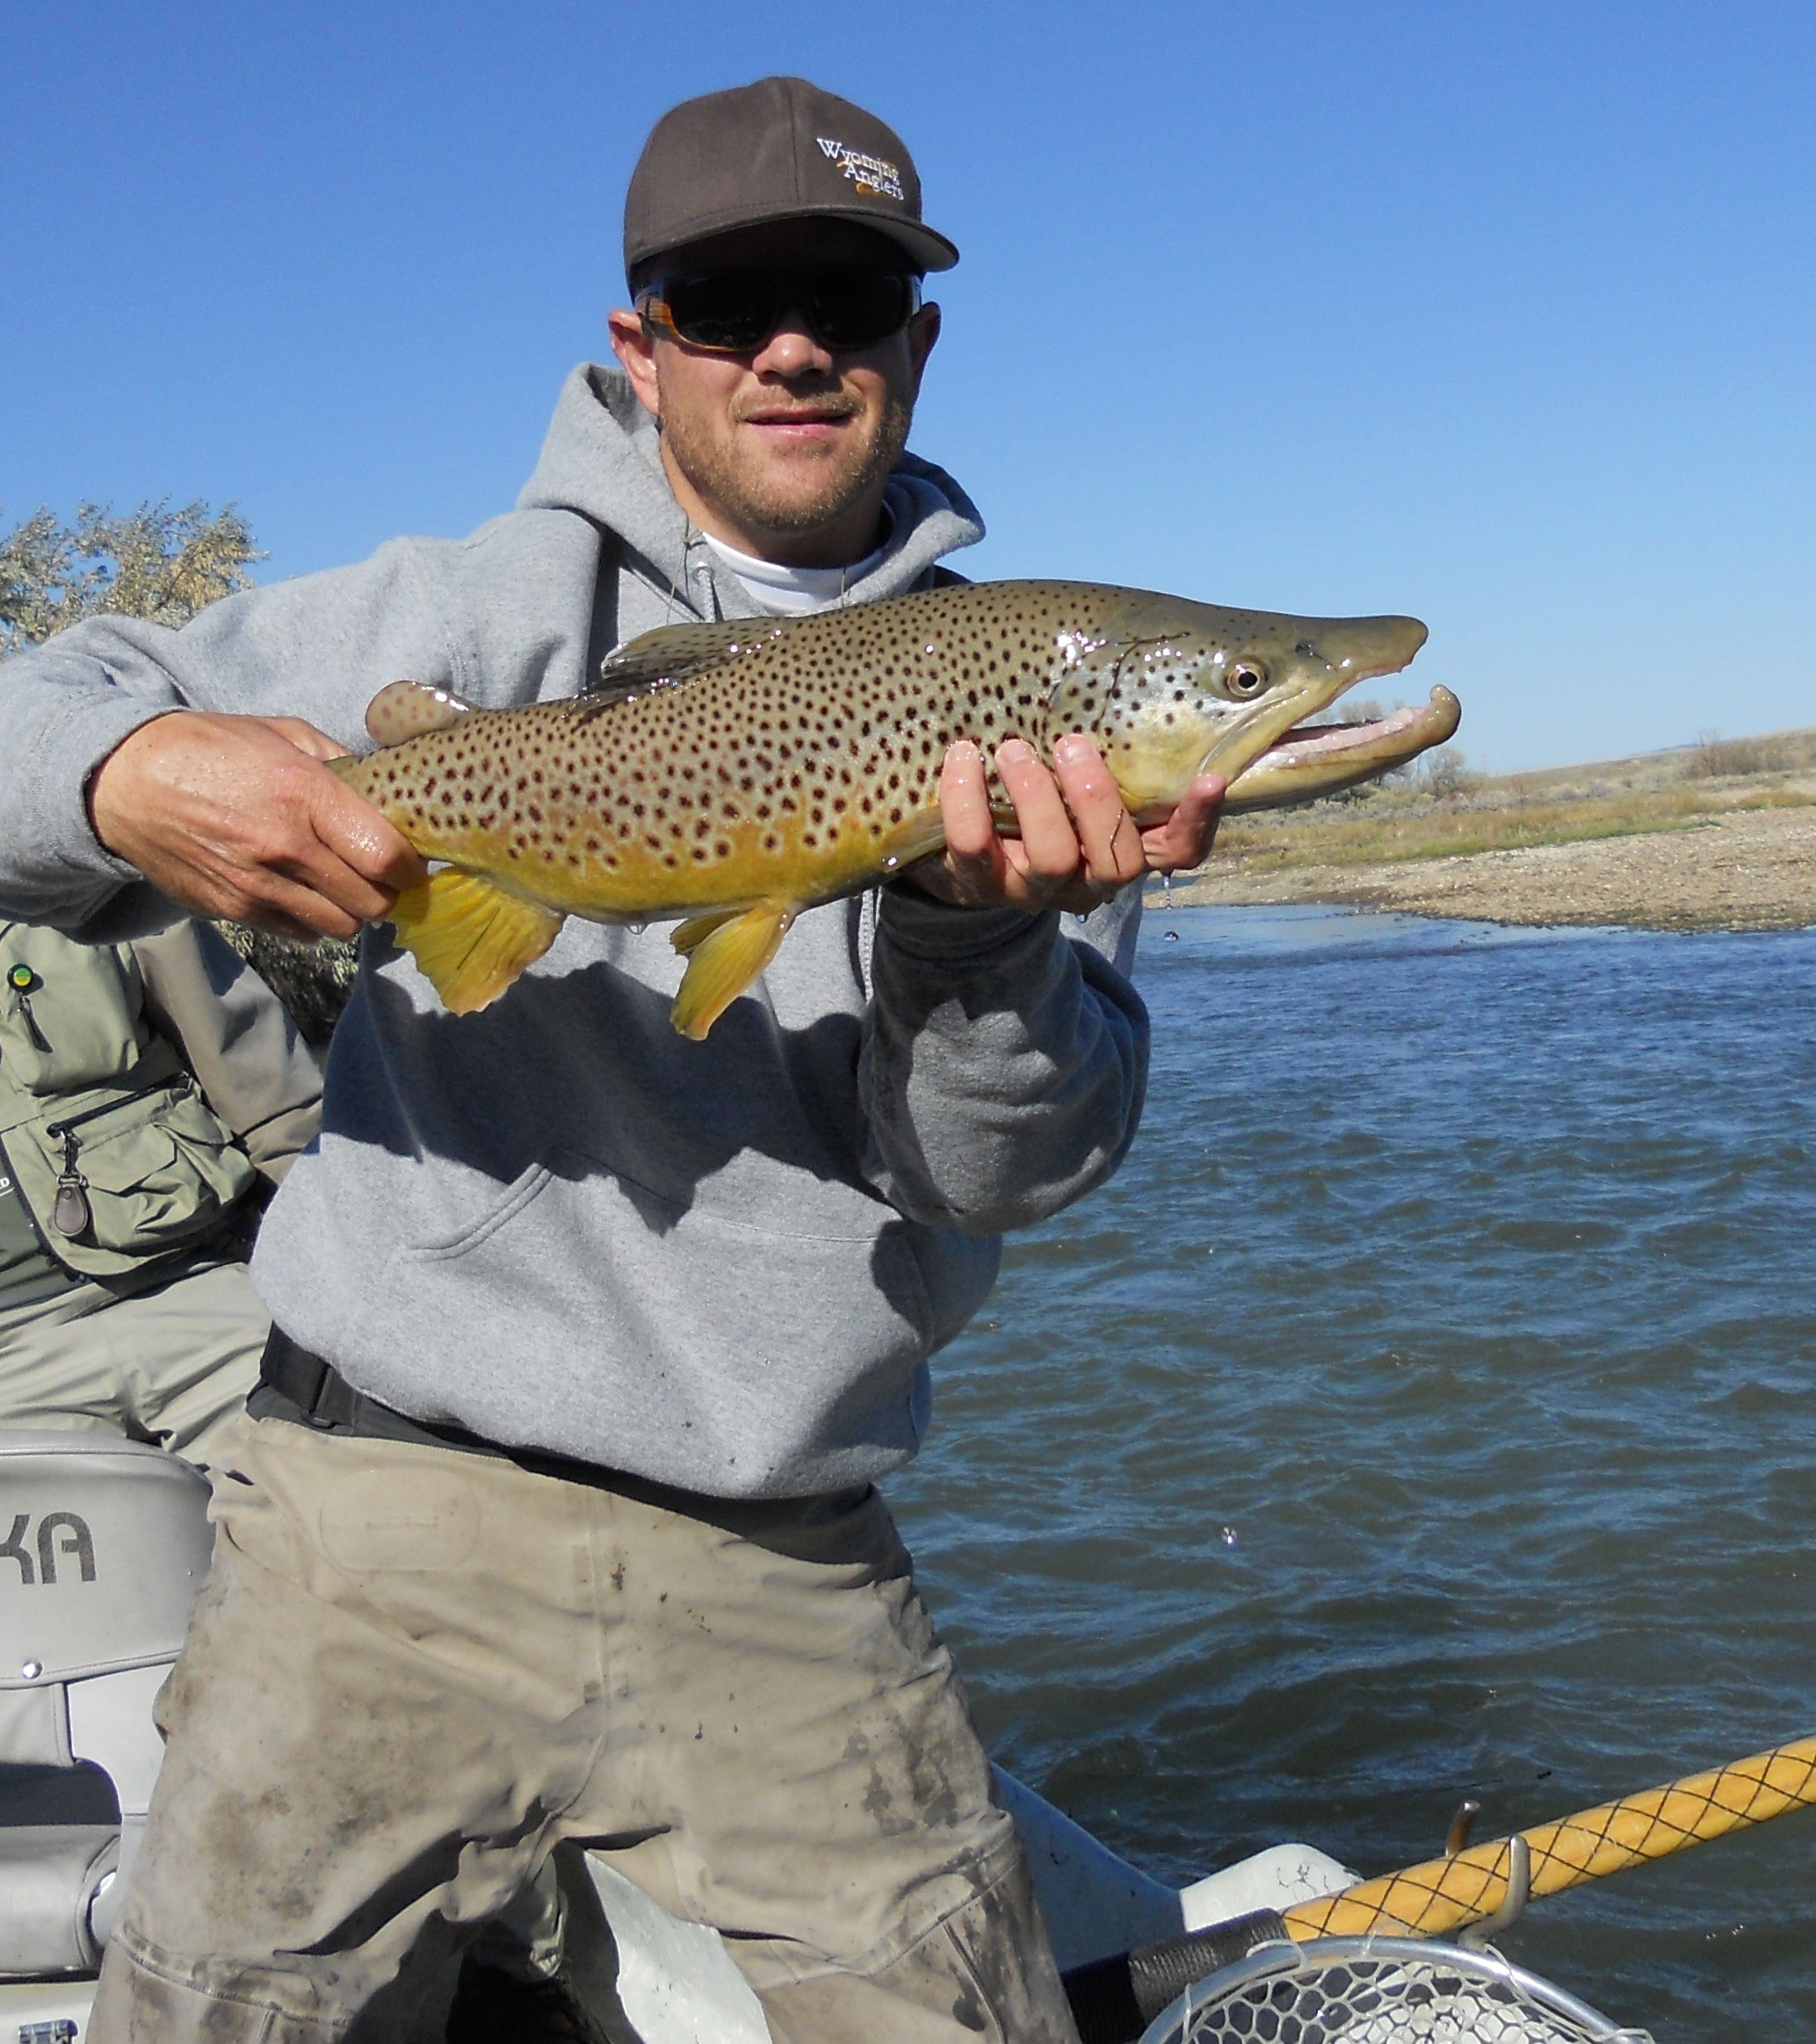 Wyoming Fly Fishing Lessons - Wyoming Anglers, learn fly fishing 